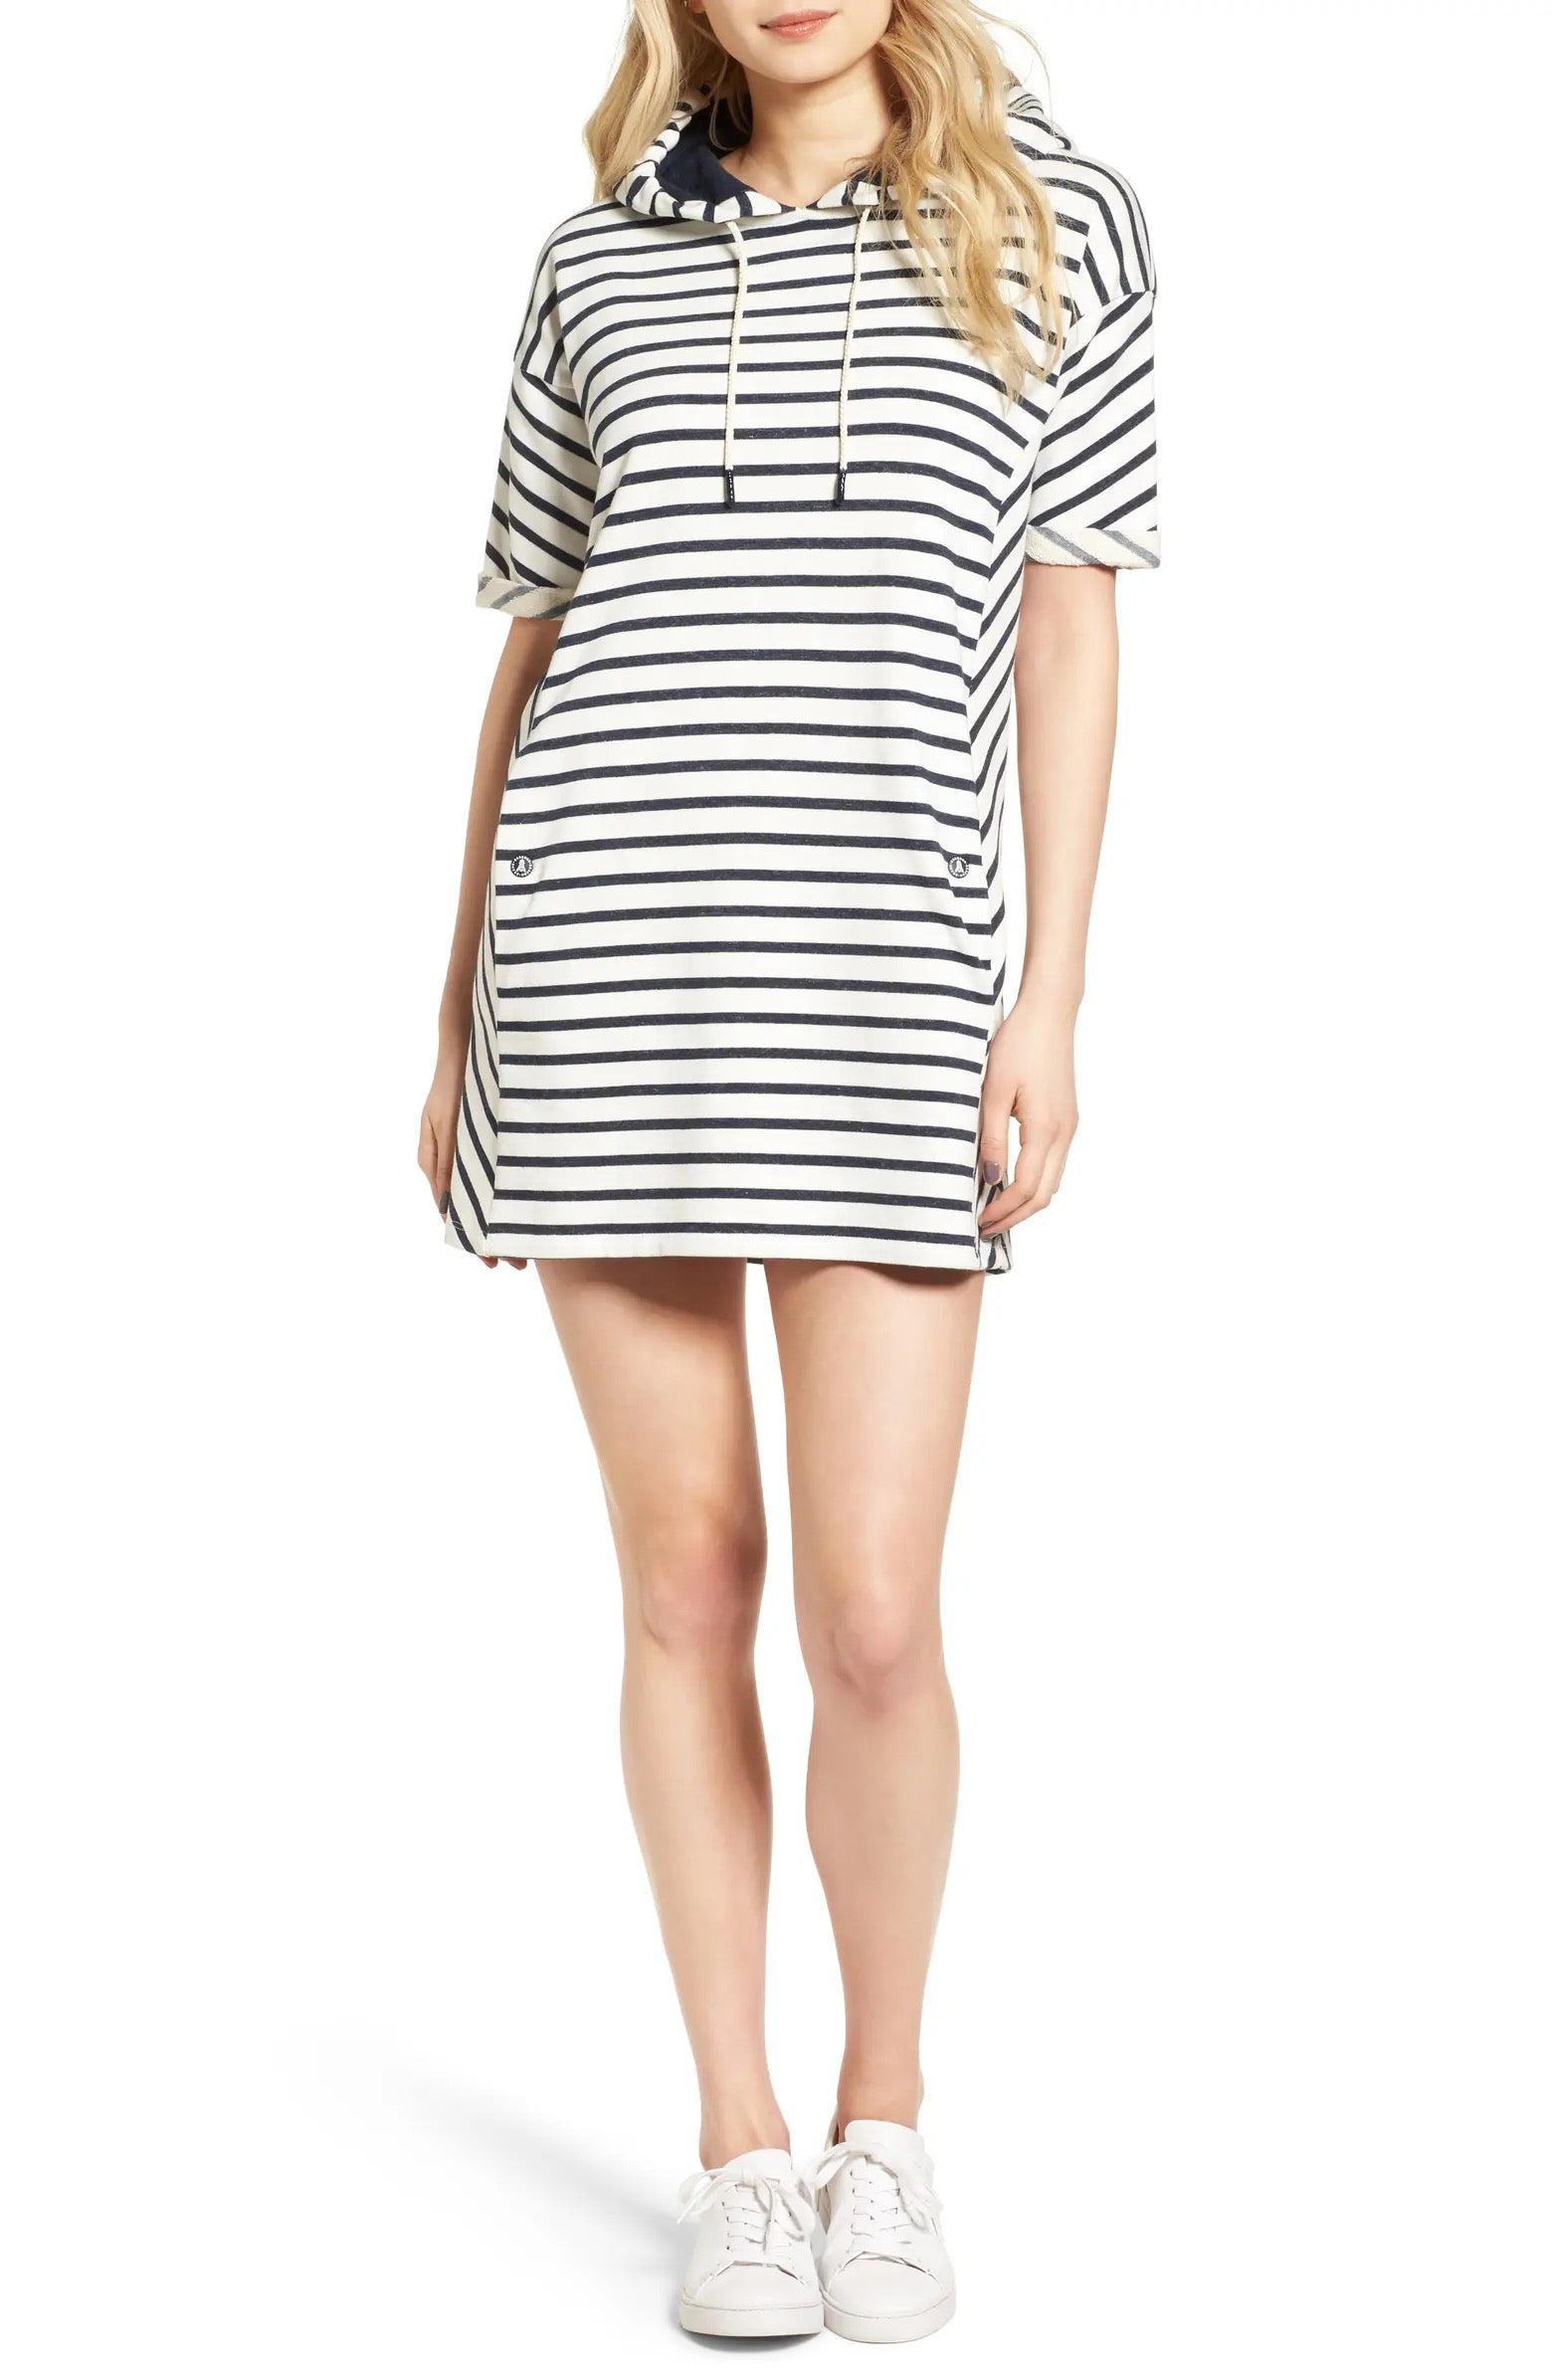 Barbour Women's Dive Stripe Terry Hooded Dress